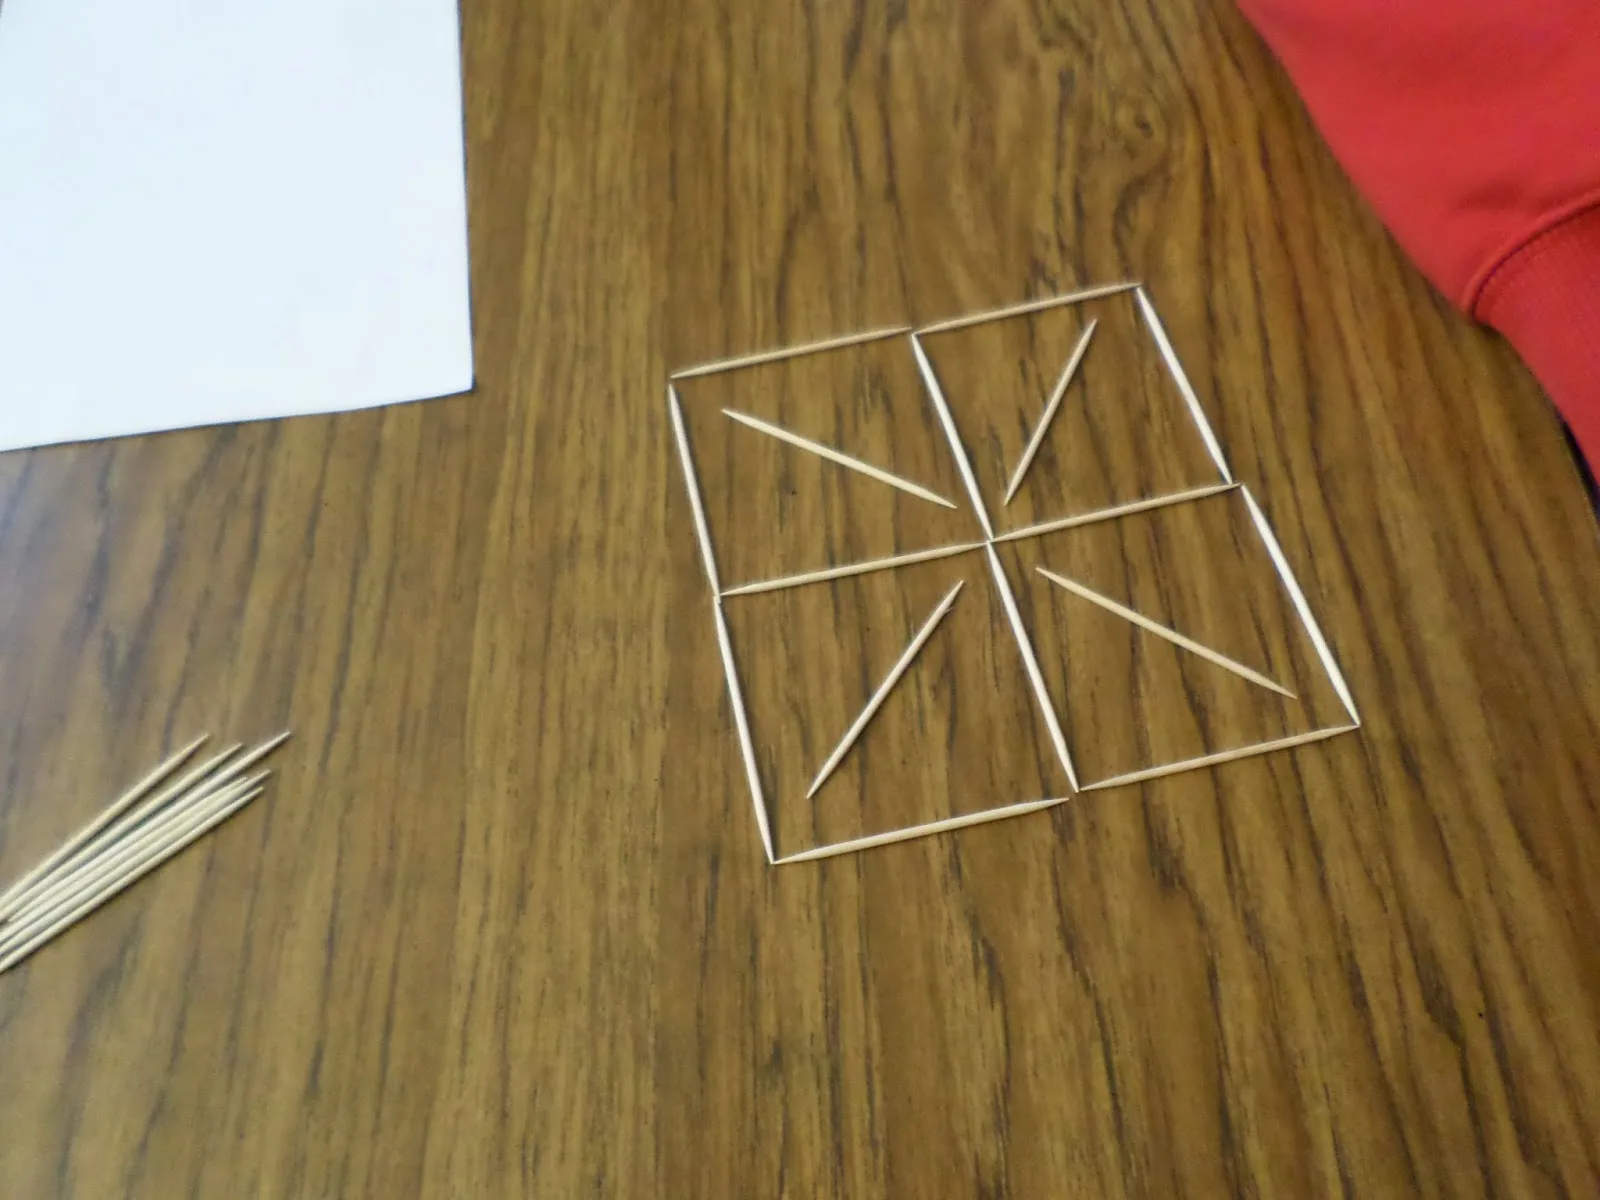 toothpick design on desk by student. 